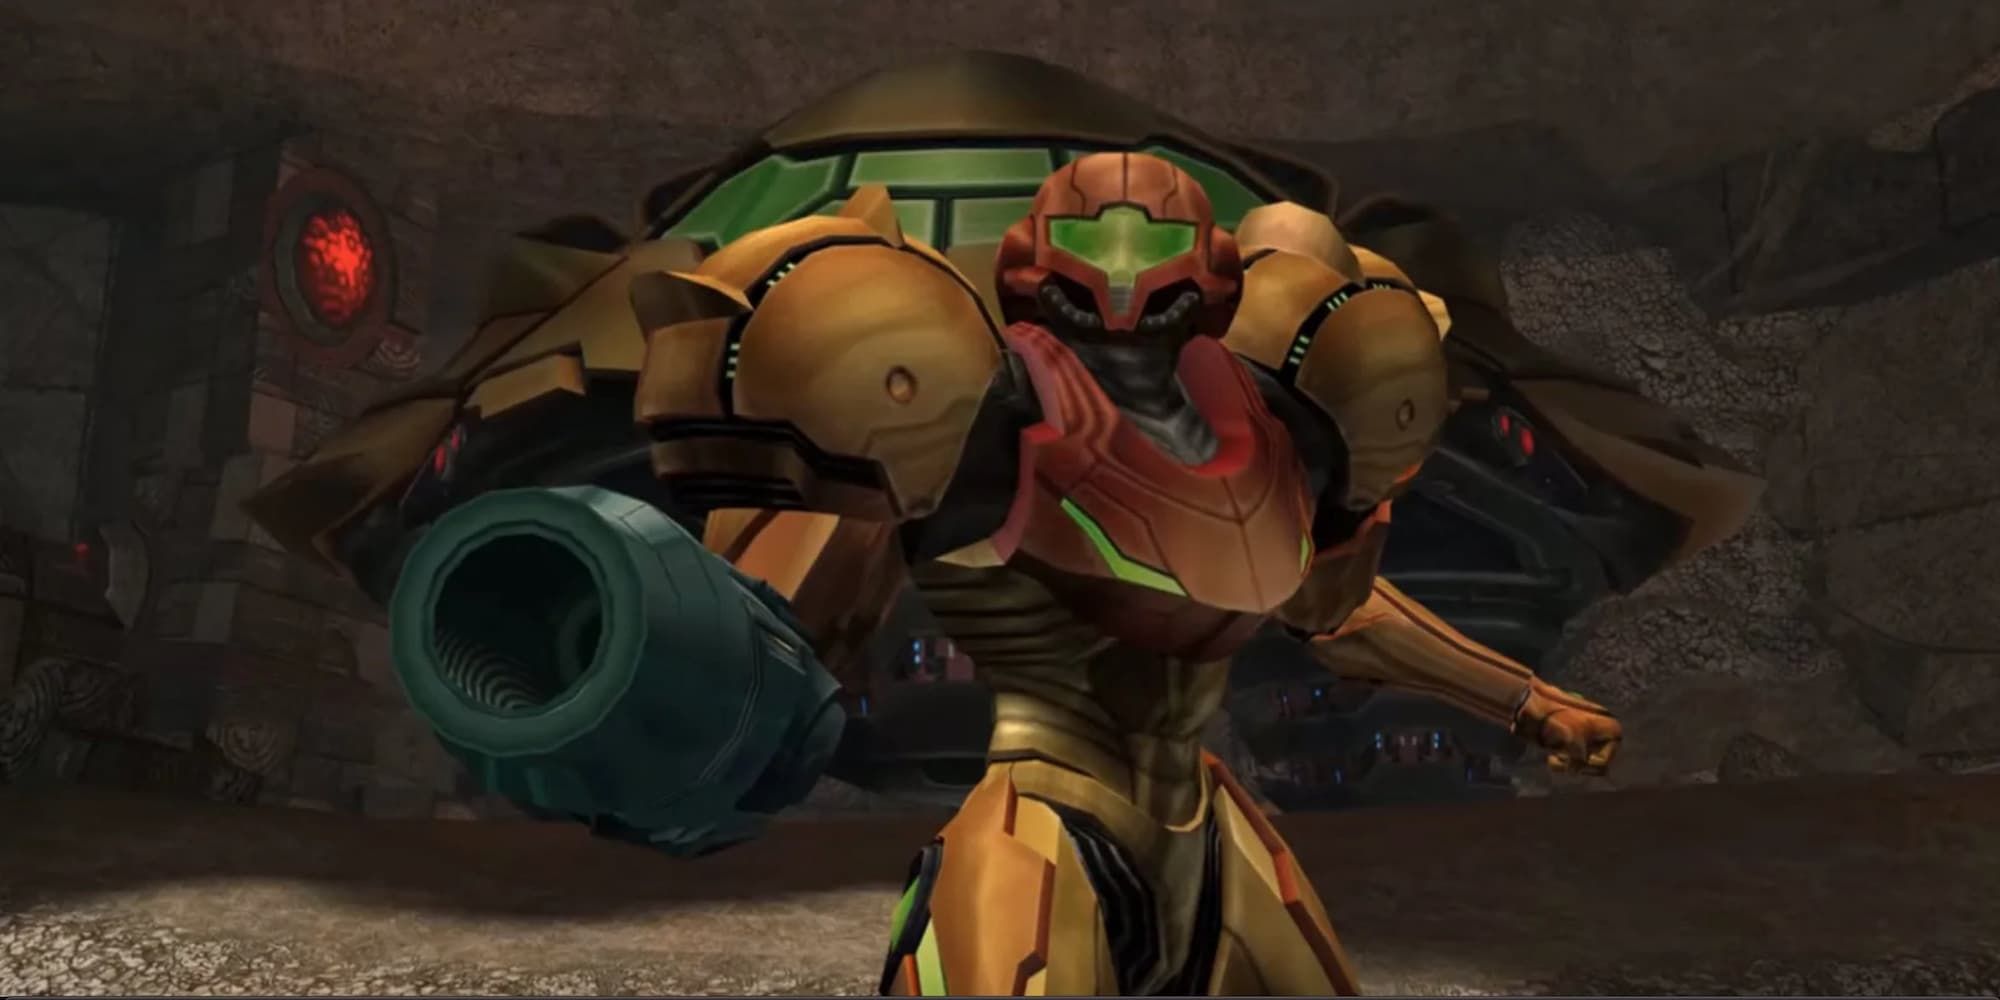 Samus standing in front of her ship in Metroid Prime 2